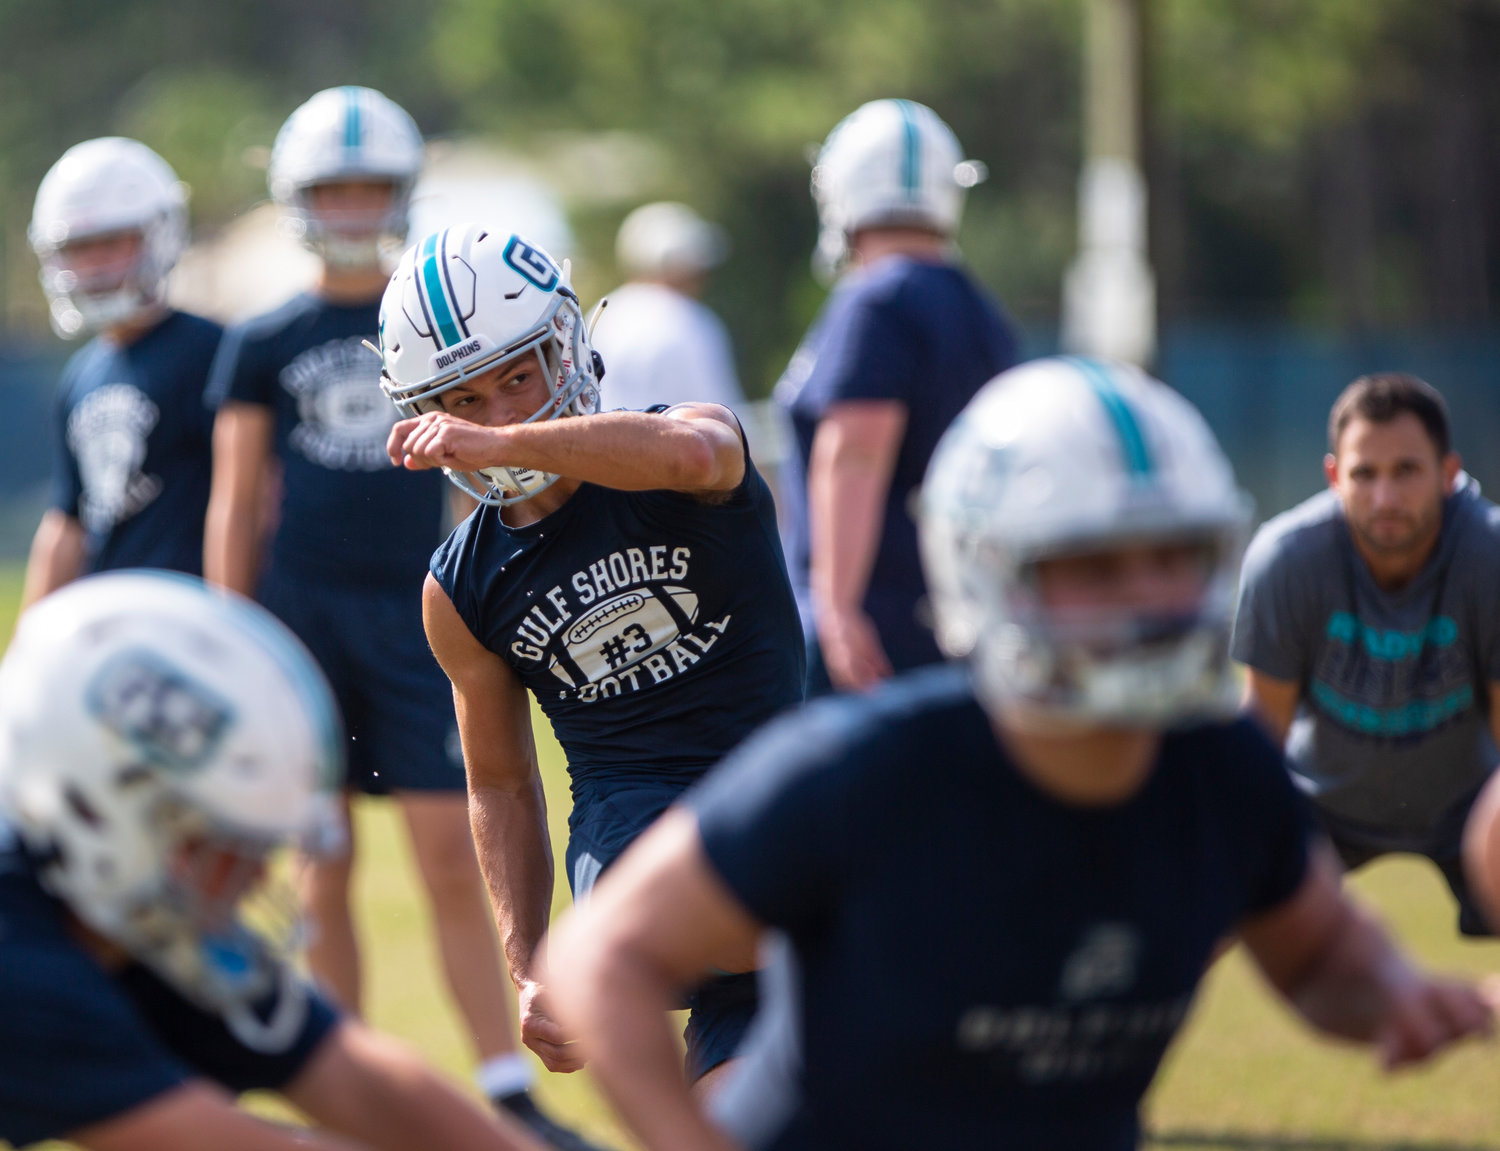 Gulf Shores’ Will Langston drives a point-after try during the Dolphins’ Sept. 8 practice at the high school. Langston was named to the second-team all-state defense as a punter after Gulf Shores hosted the first playoff game in school history in 2022.